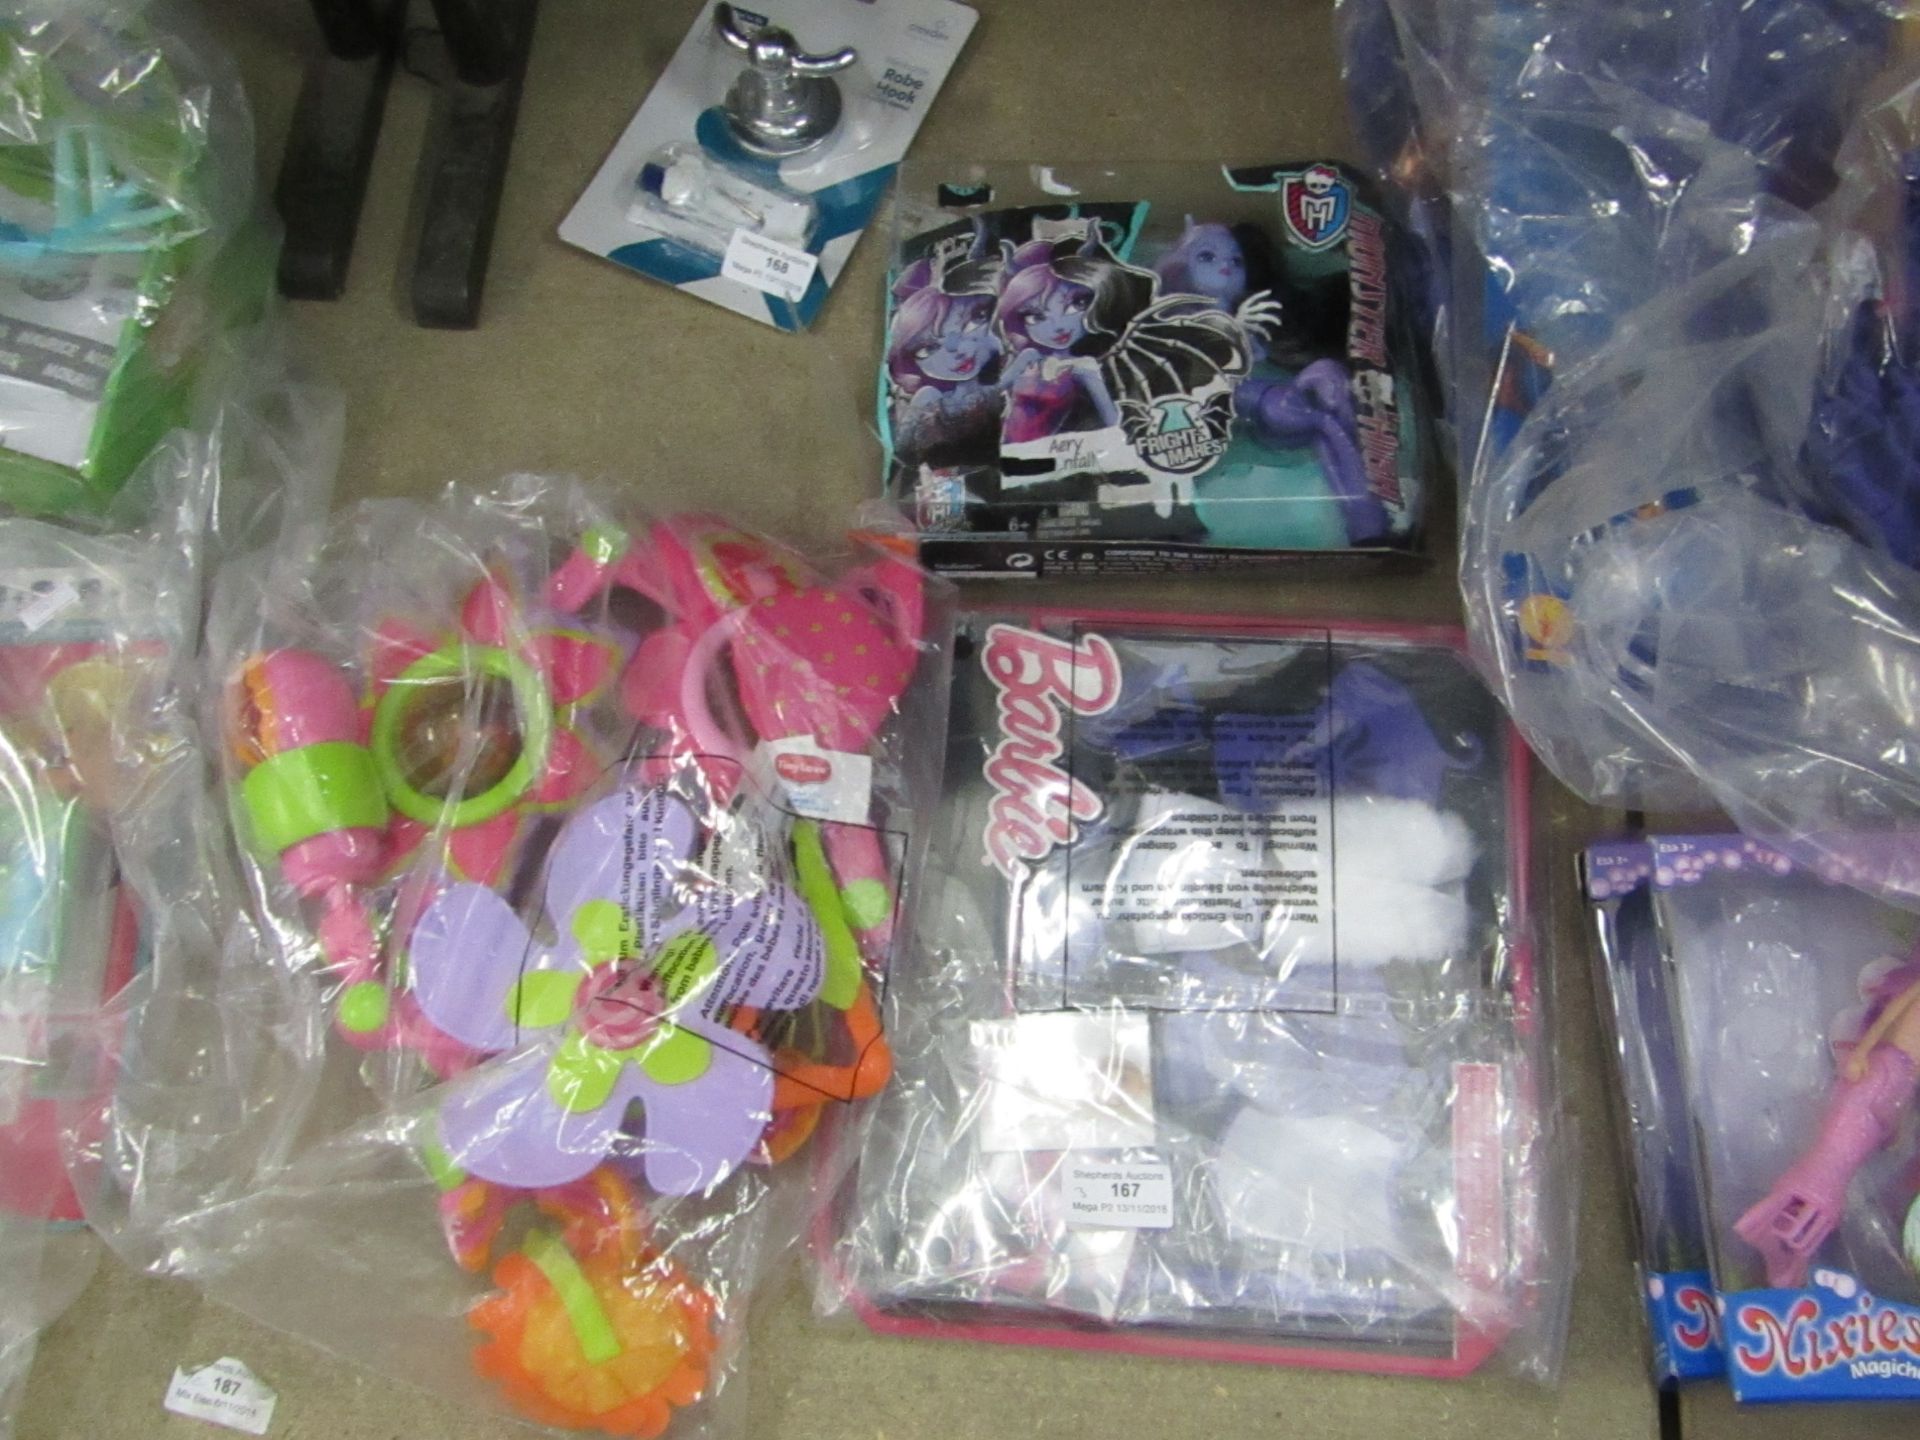 3x Items being; Monster High toy, Barbie designer set and Tiny Love baby mobile. All unchecked.